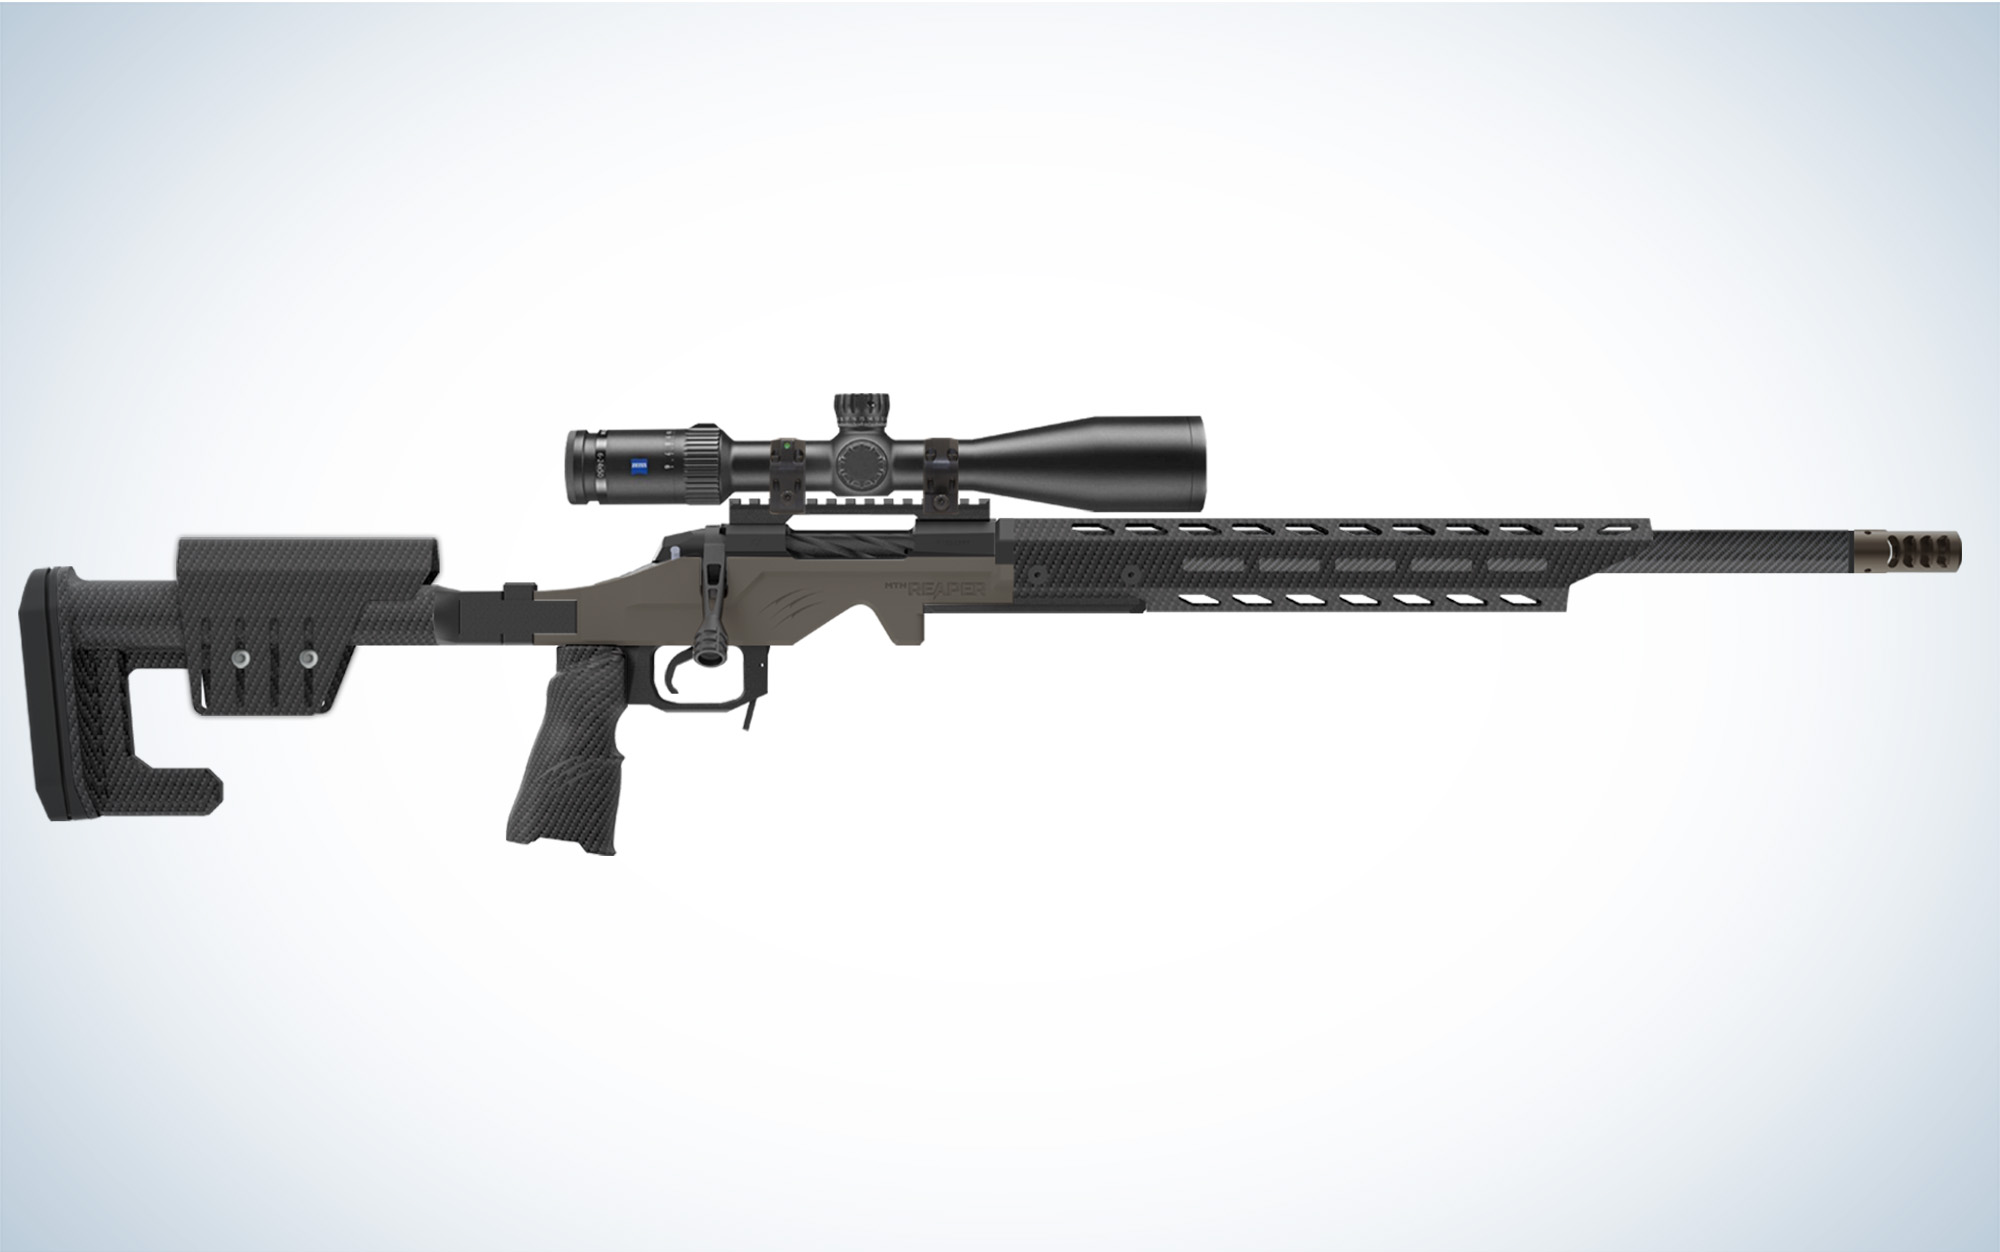 The Fierce Firearms MTN Reaper is one of the new rifles of SHOT Show 2023.